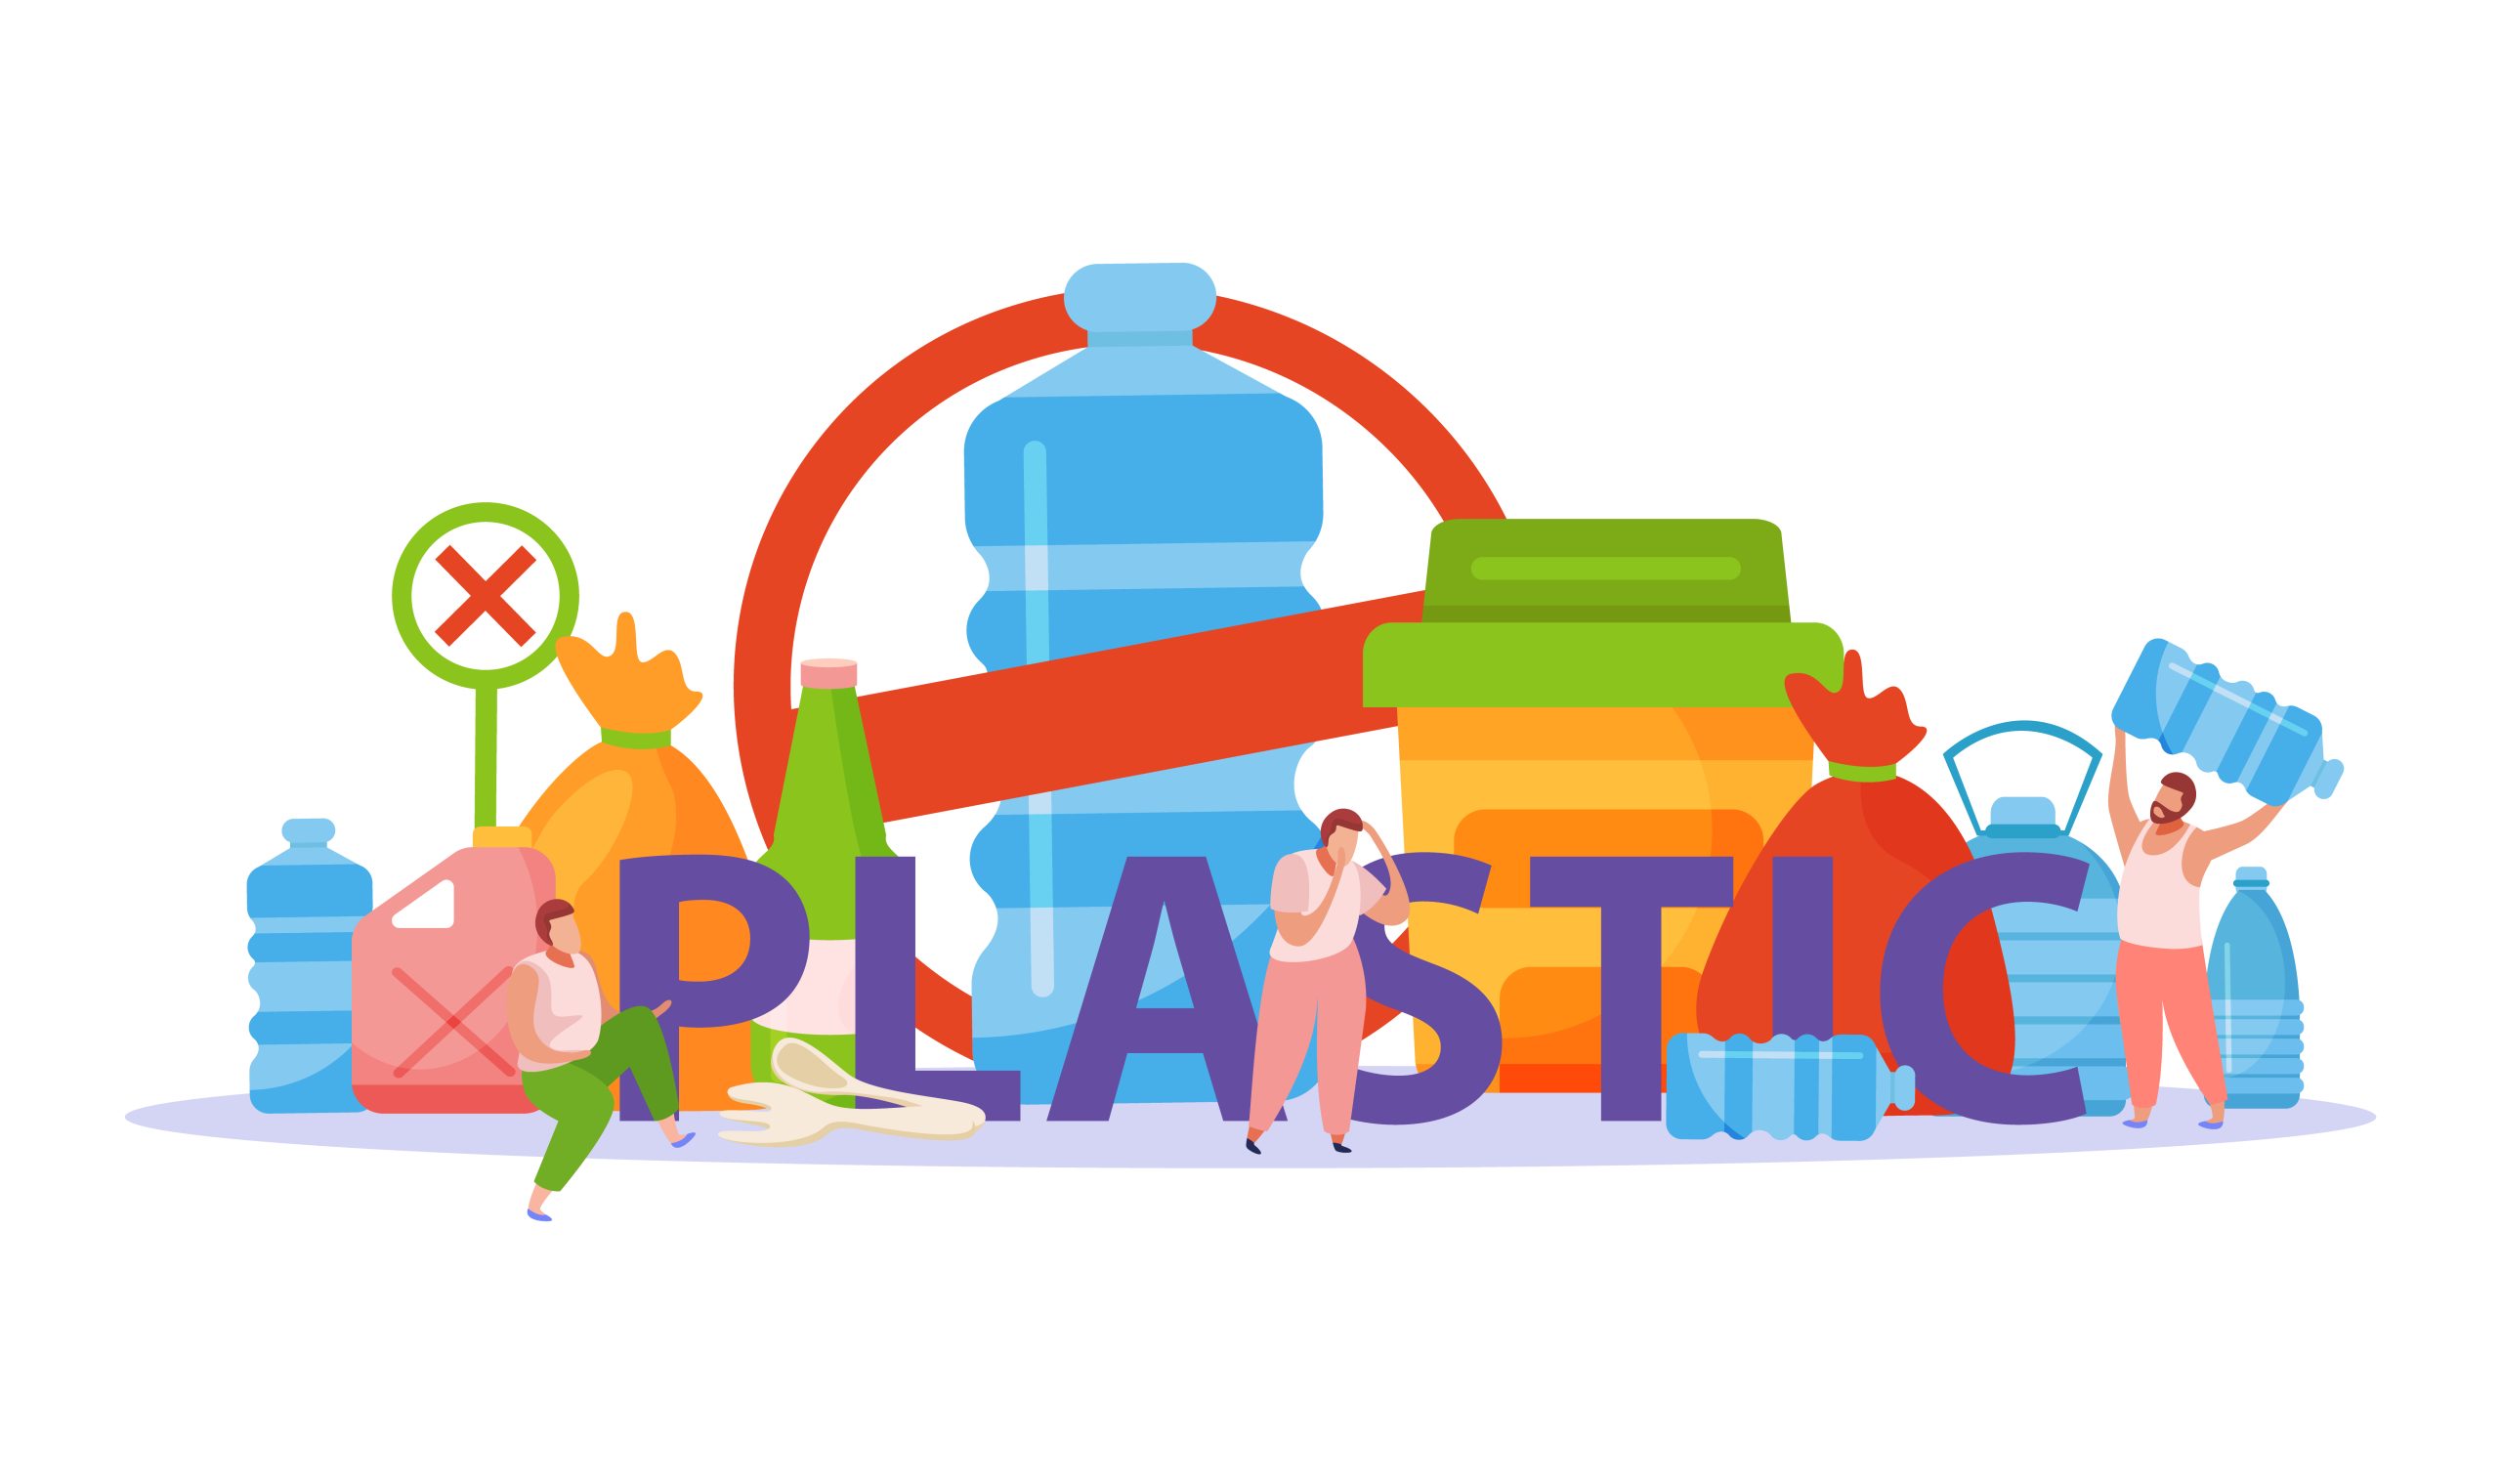 Challenges on the Path to Plastic Sustainability: PepsiCo’s Journey